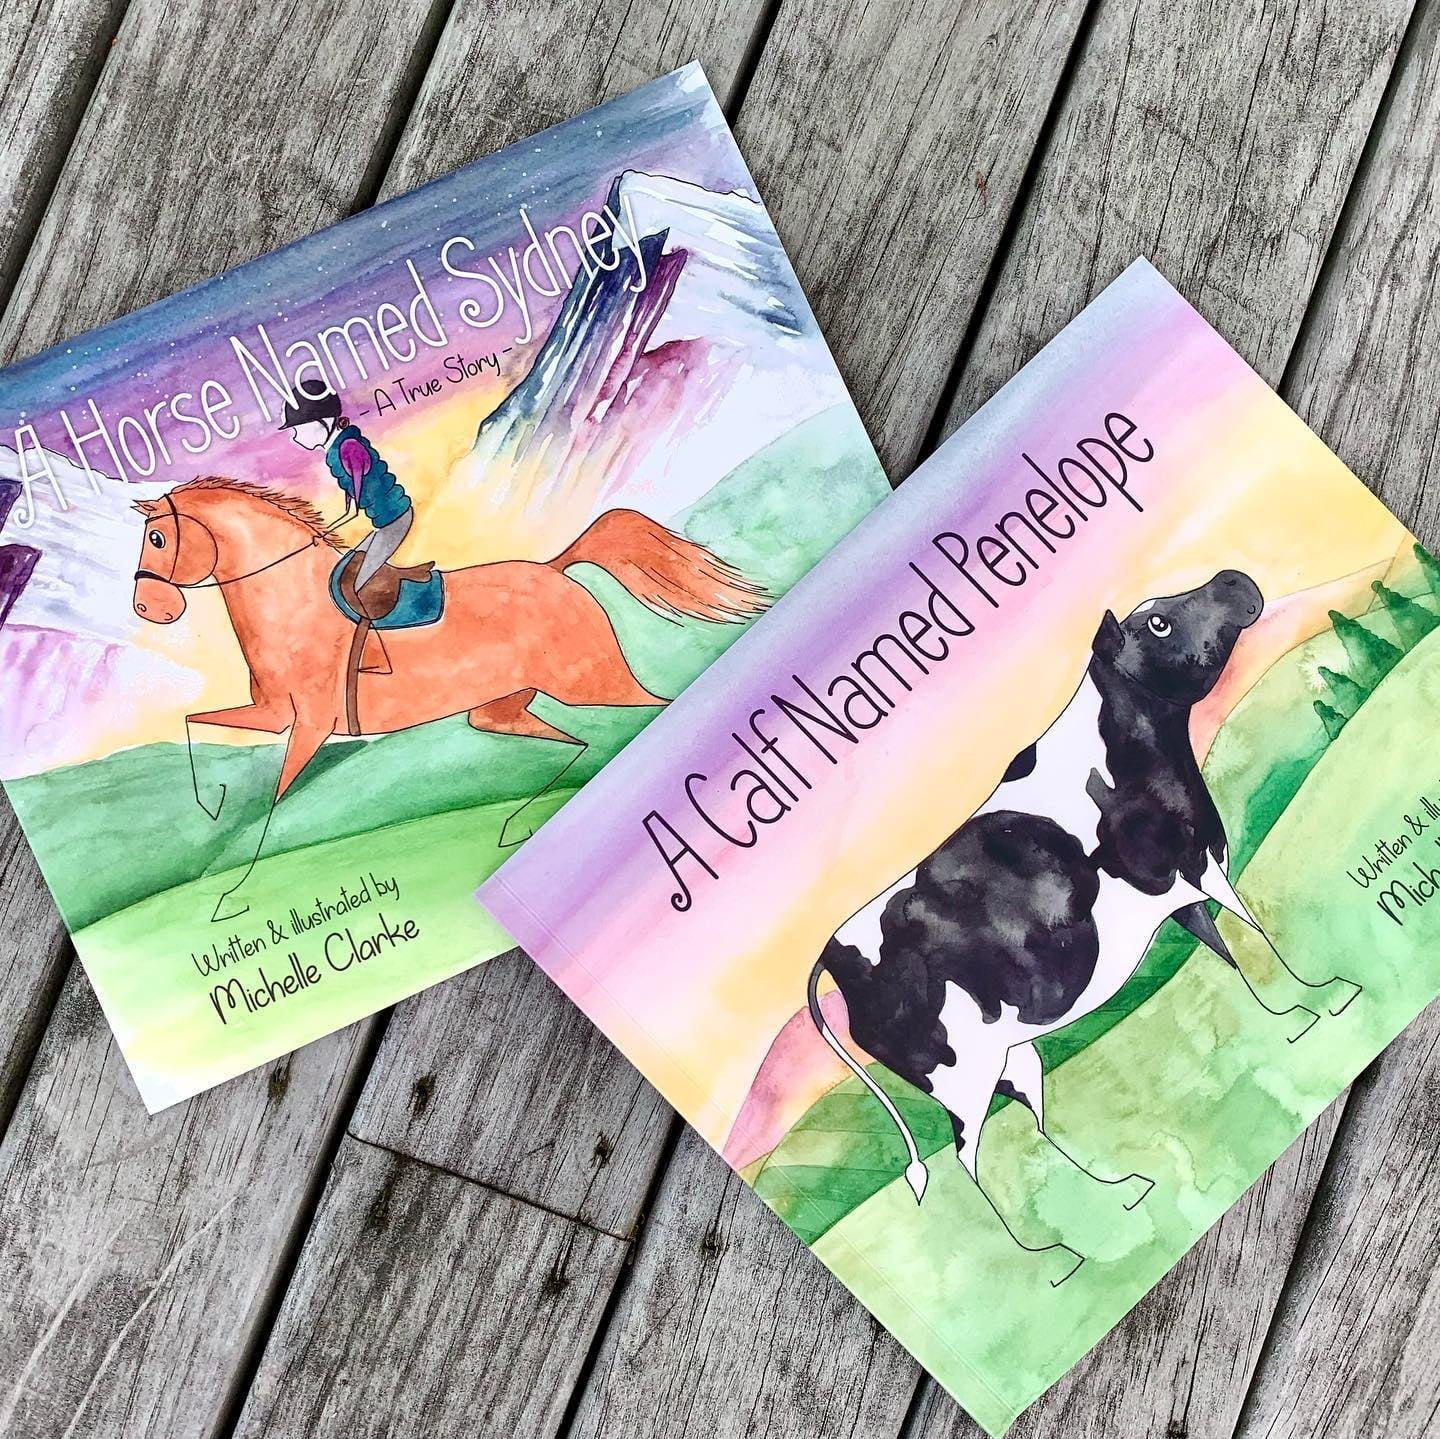 A Calf Named Penelope written & illustrated by Michelle Clarke